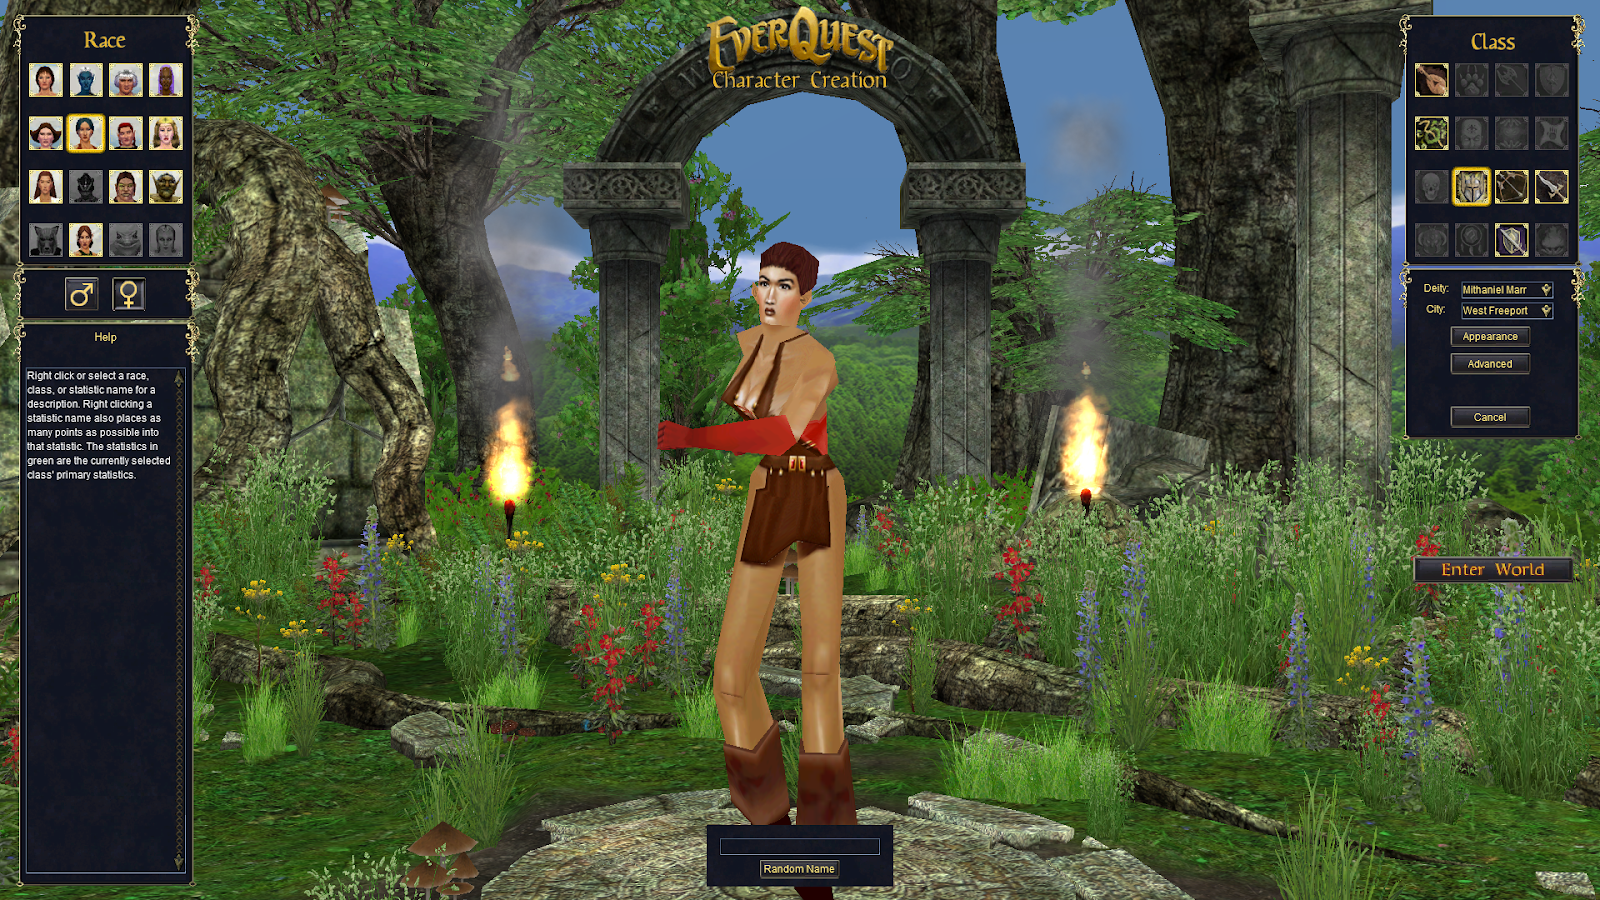 Live in Fantasy by Playing EverQuest on Steam